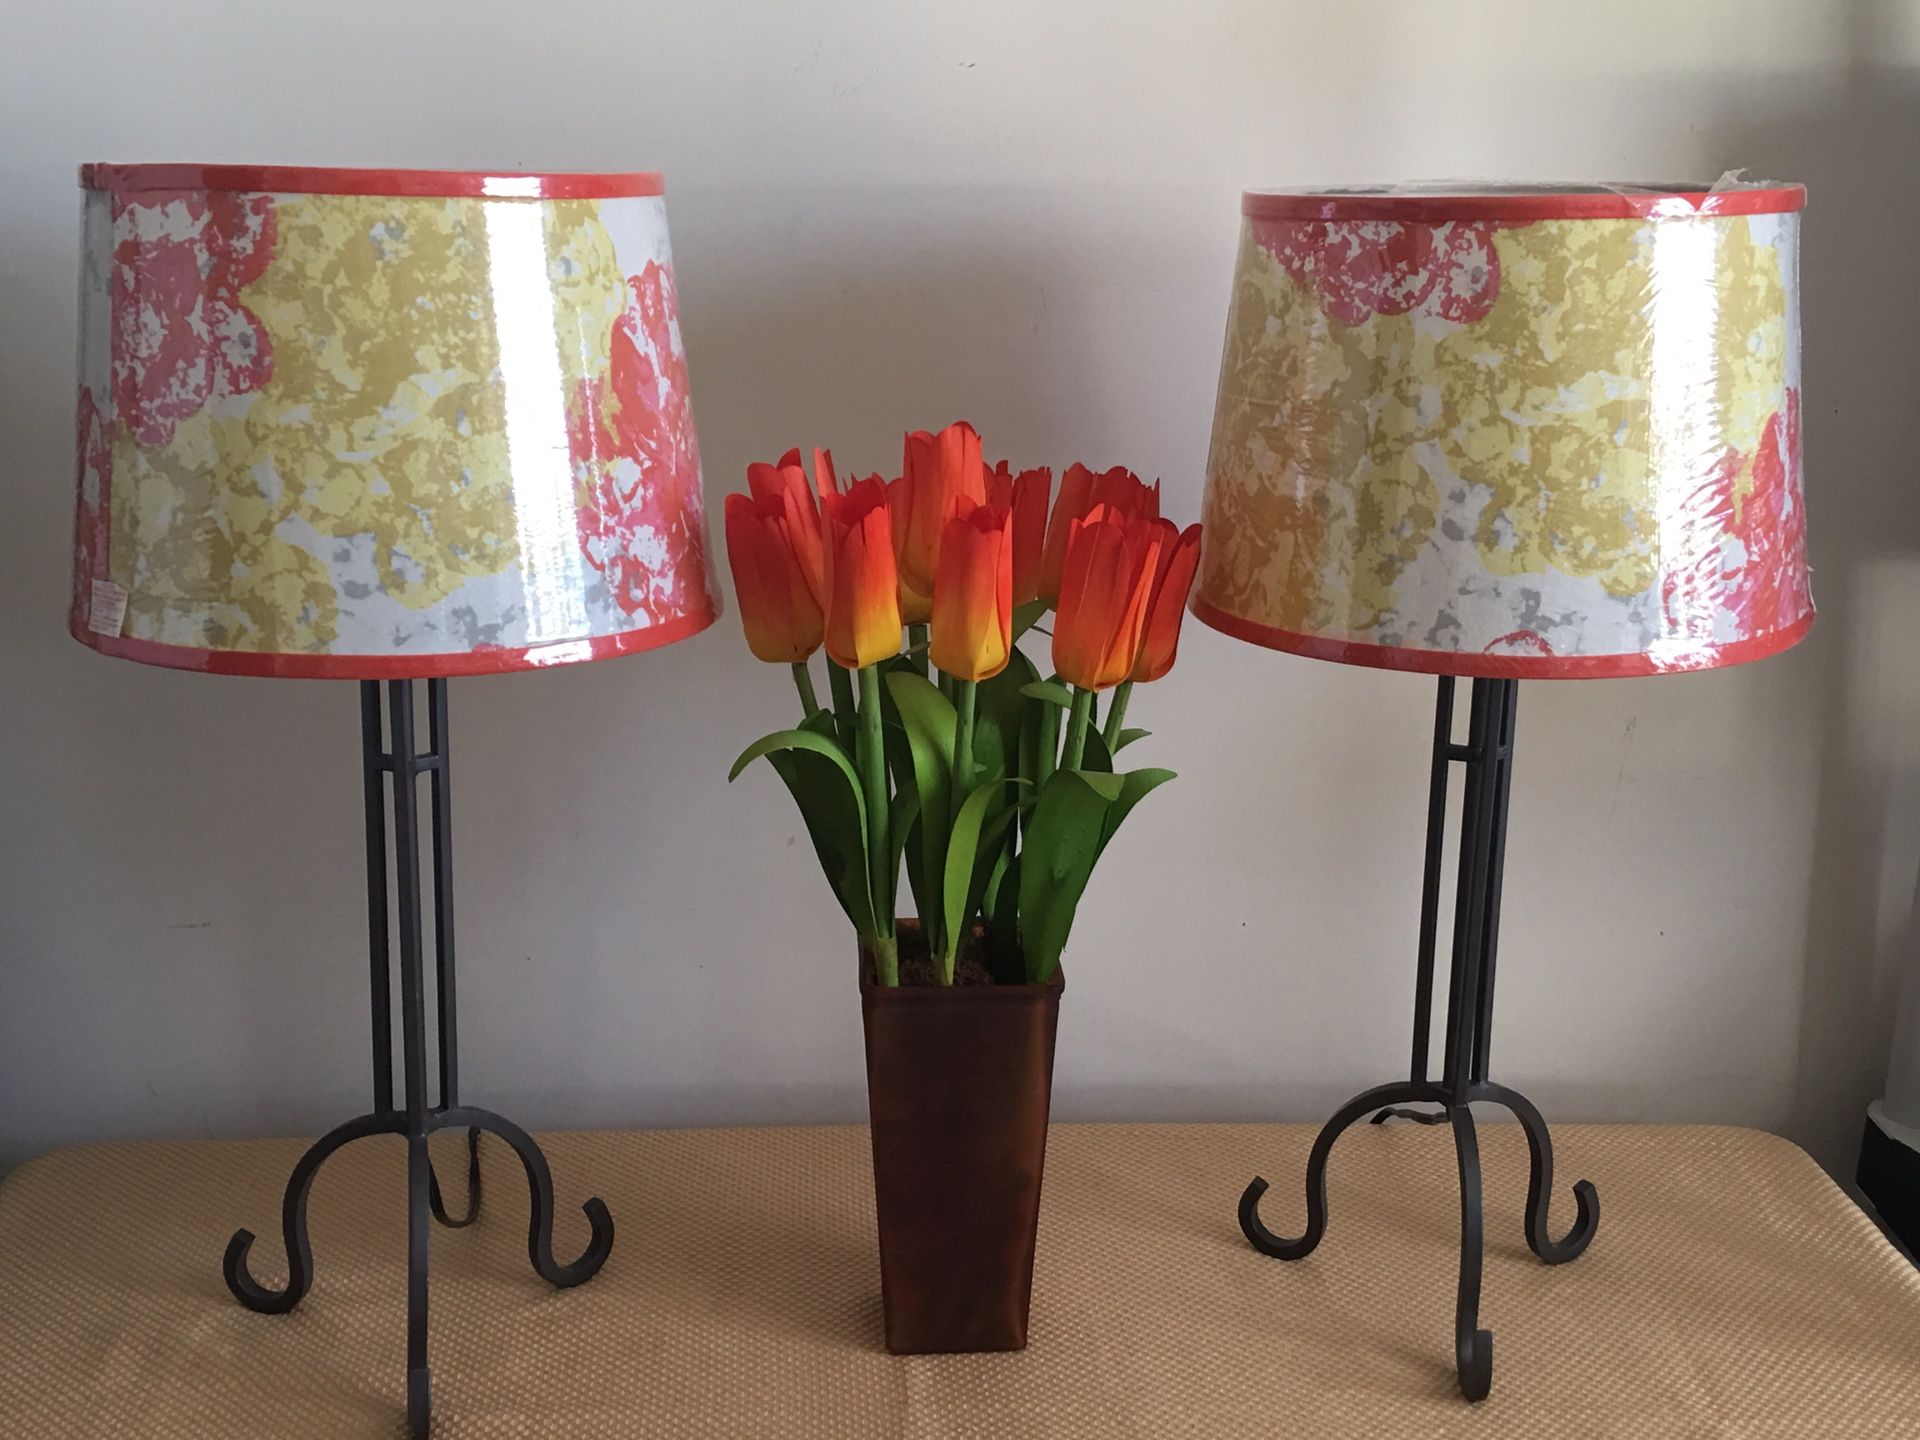 Pair of Lamps. New floral shades on steel gray base